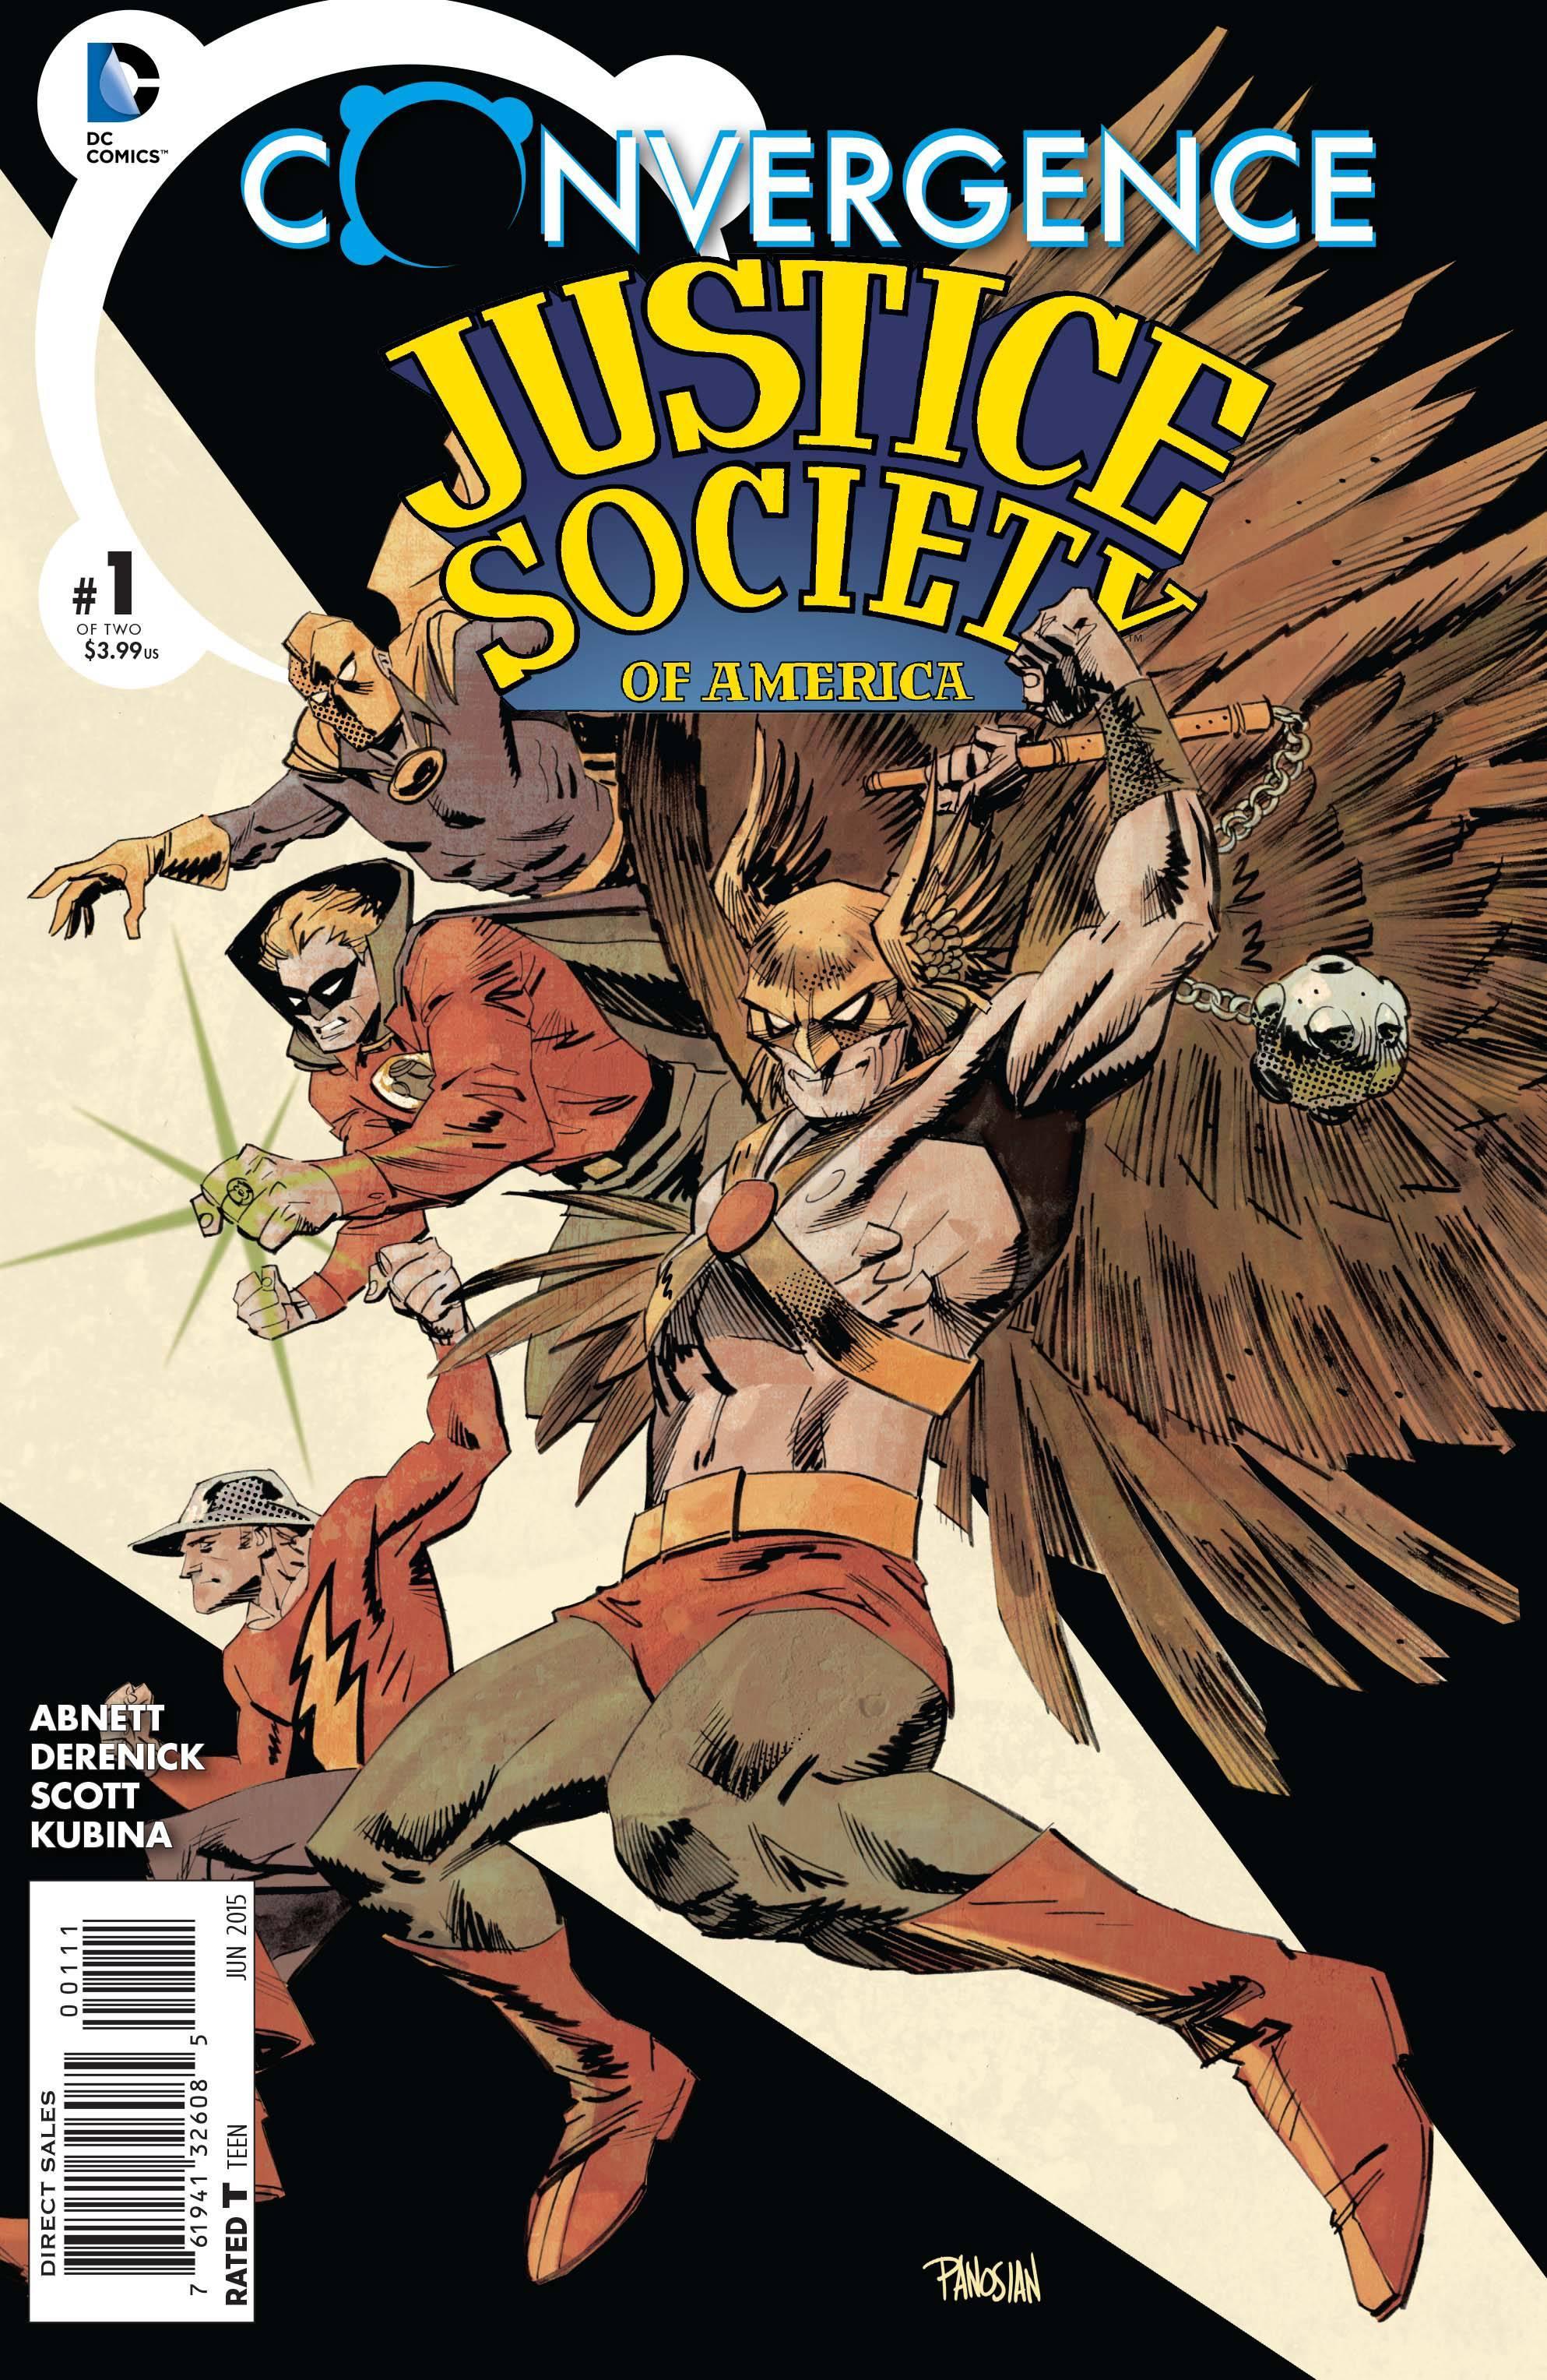 CONVERGENCE JUSTICE SOCIETY OF AMERICA #1 - Kings Comics